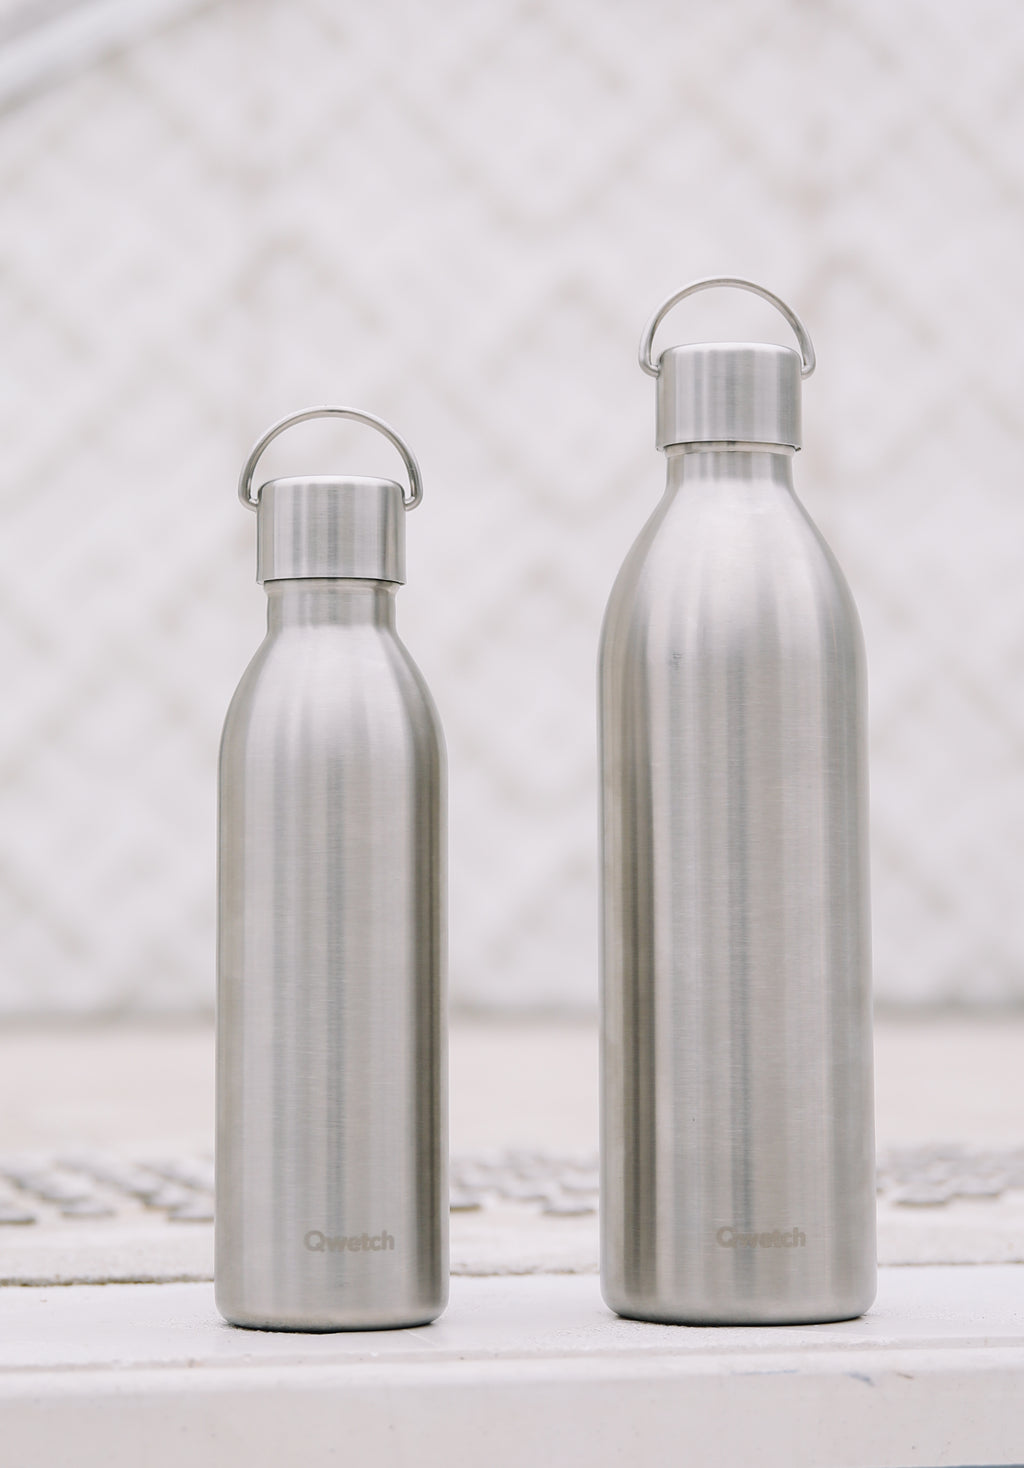 Insulated bottle - Active Stainless steel